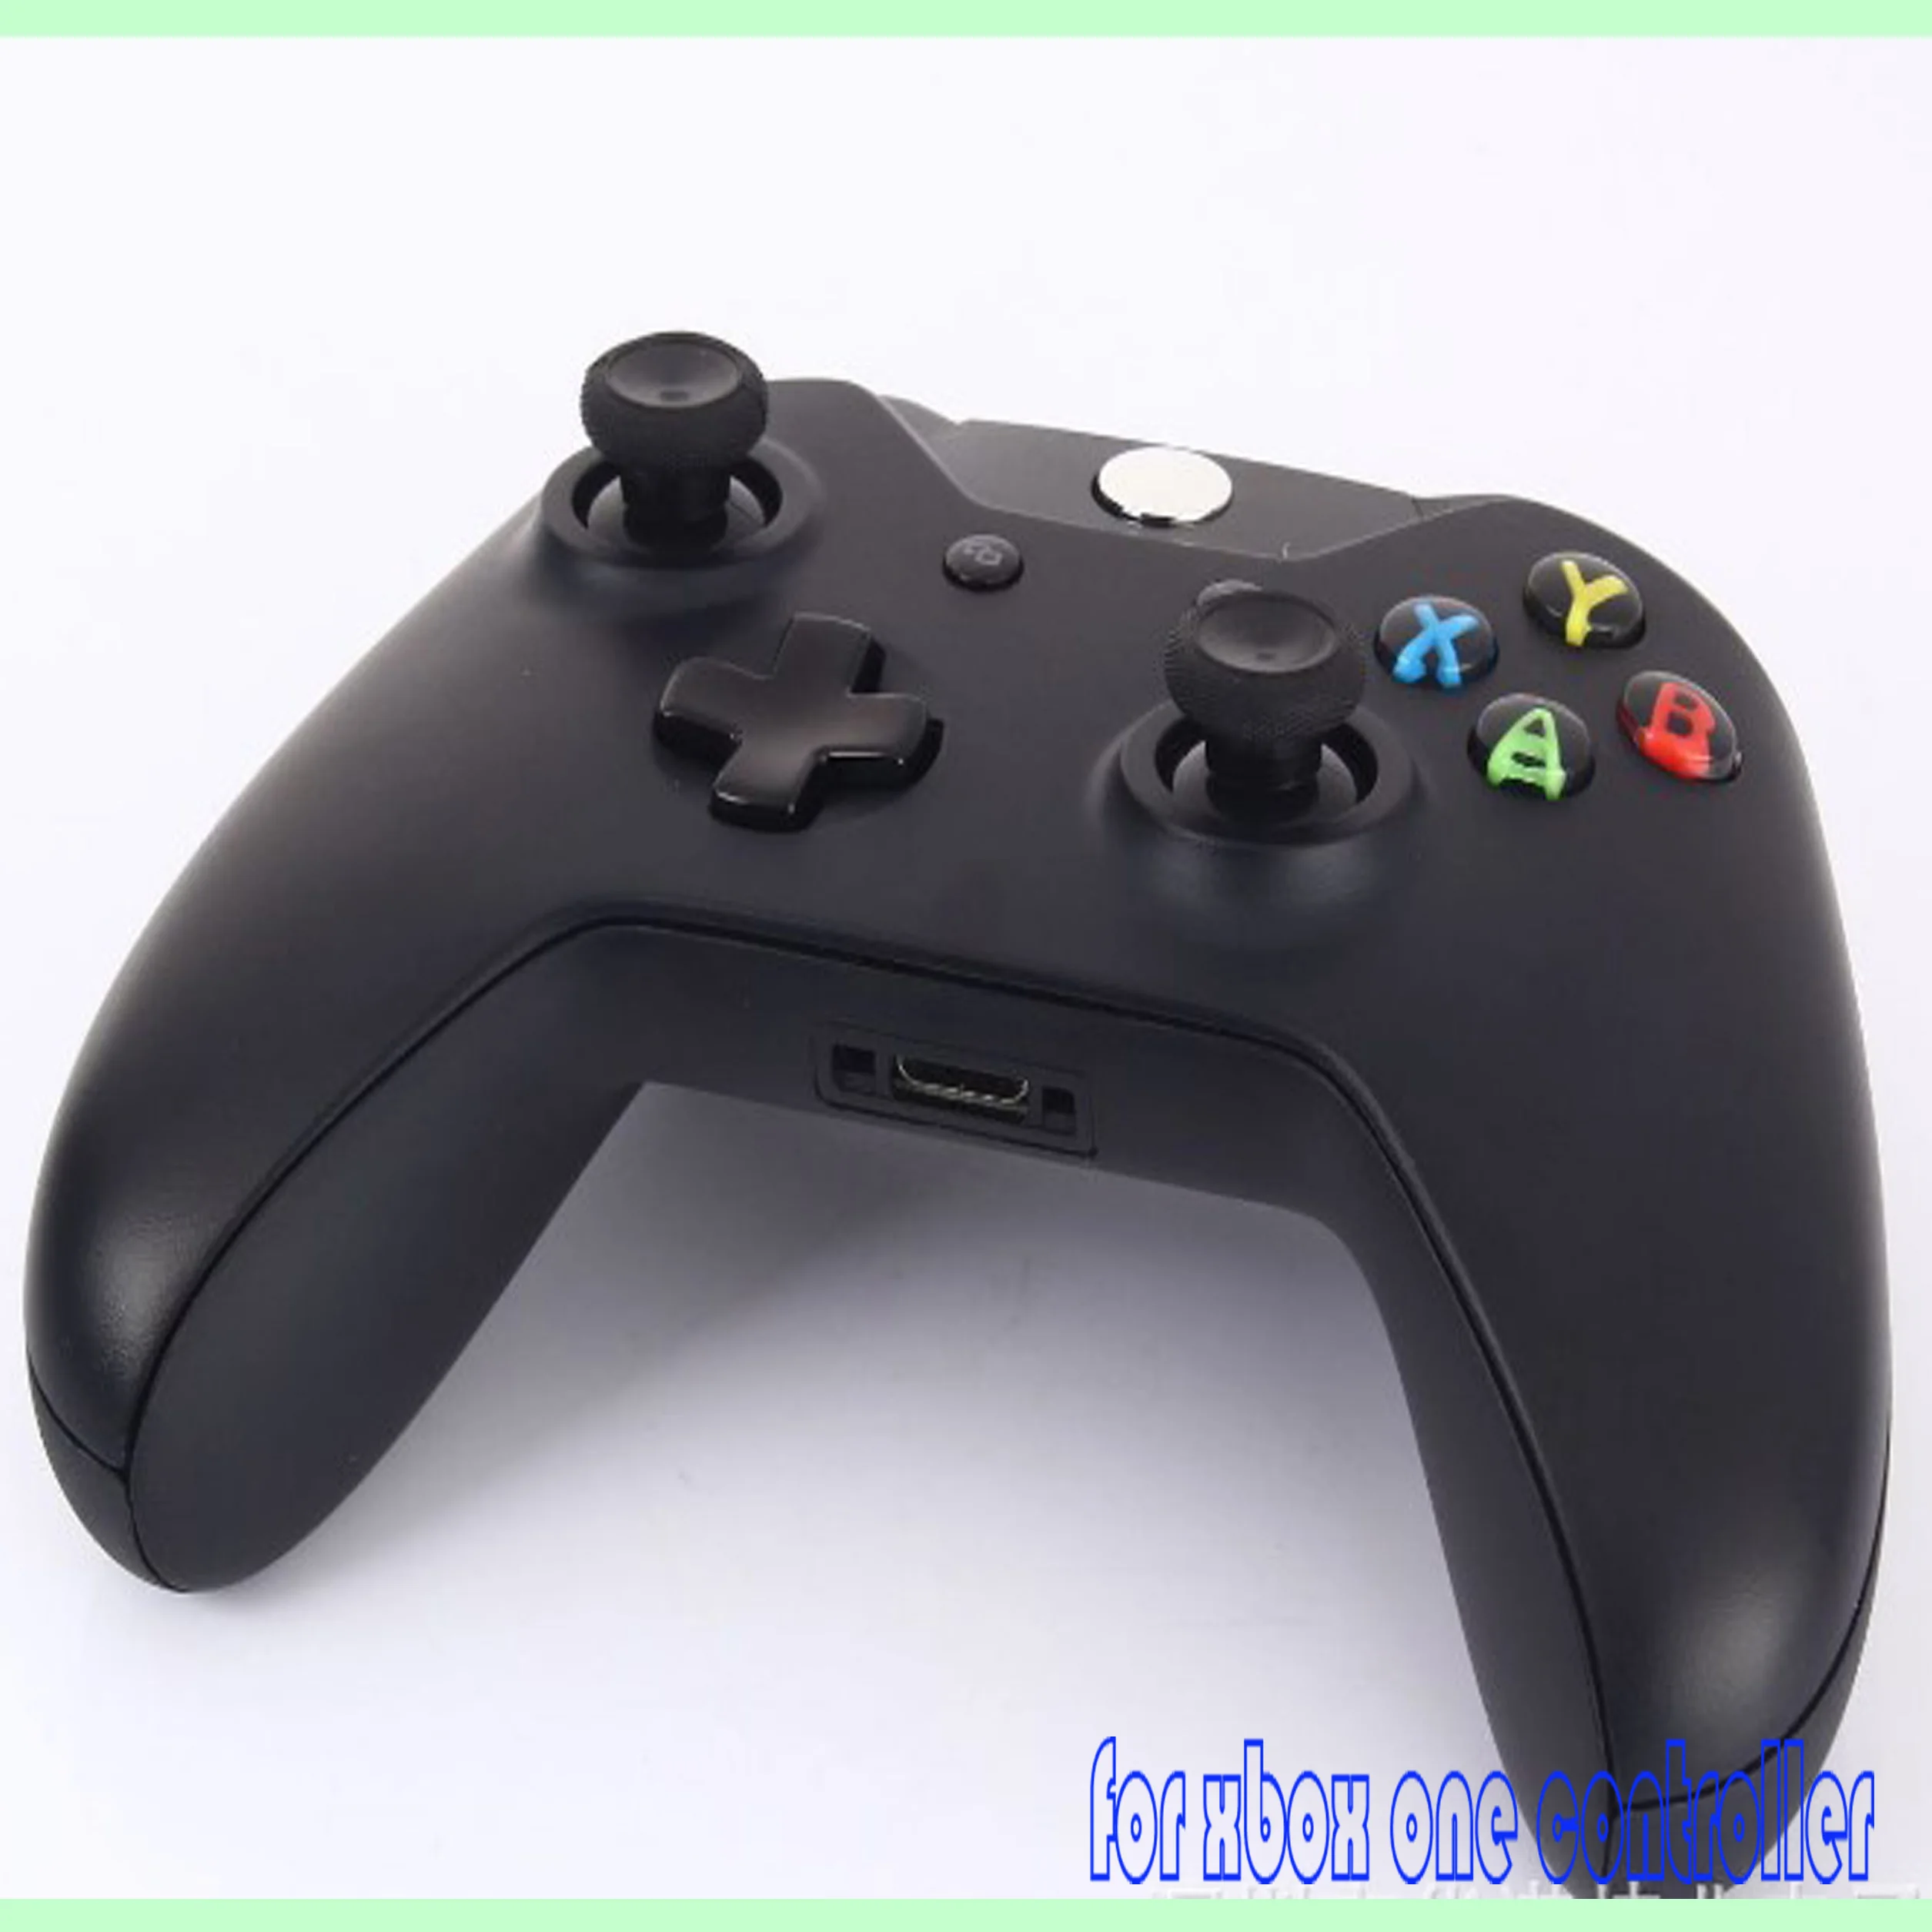 

2020 Hot!!! Wireless Controller Gamepad For Xbox One Control For PS3 For PC For Android phone For Xbox One S/X Console Joystick, Black/white